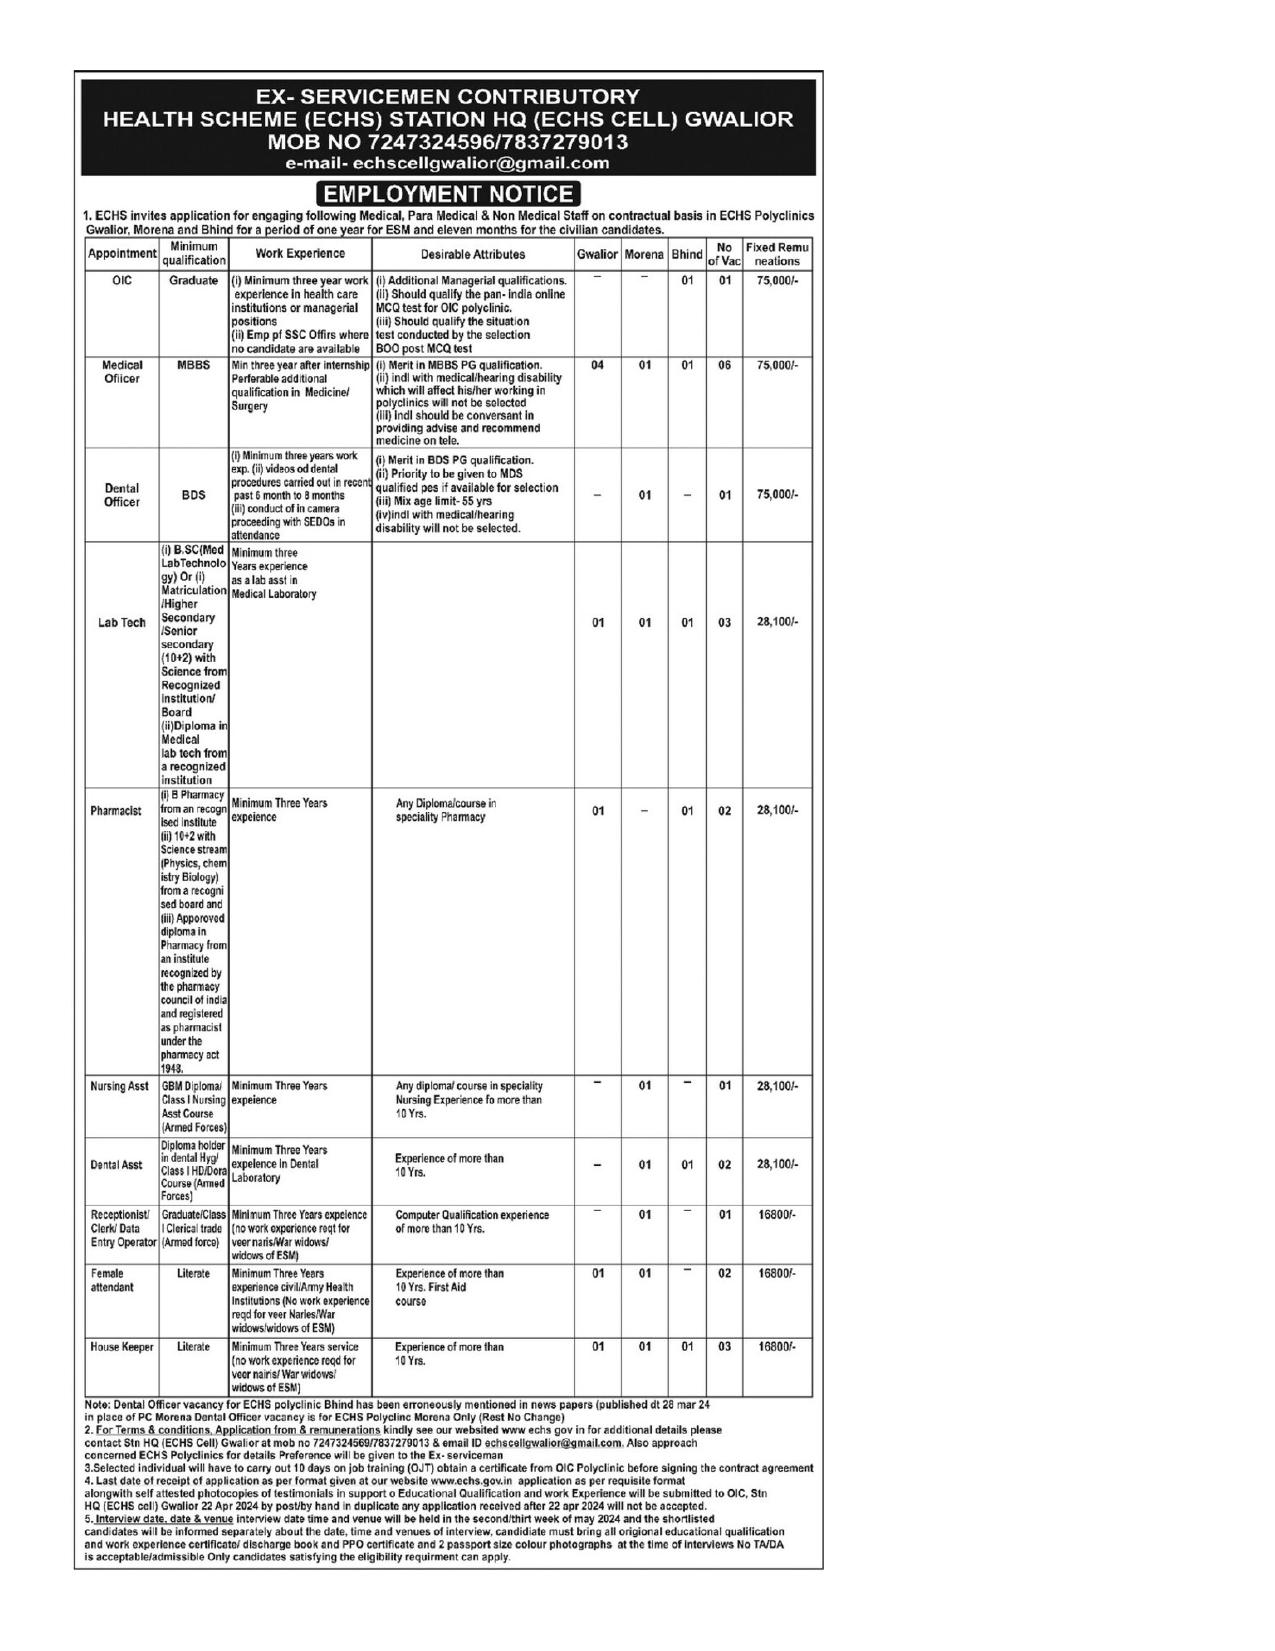 ECHS Recruitment For 22 Medical Officer, Dental Officer & Other Posts - 22 Posts - Page 1